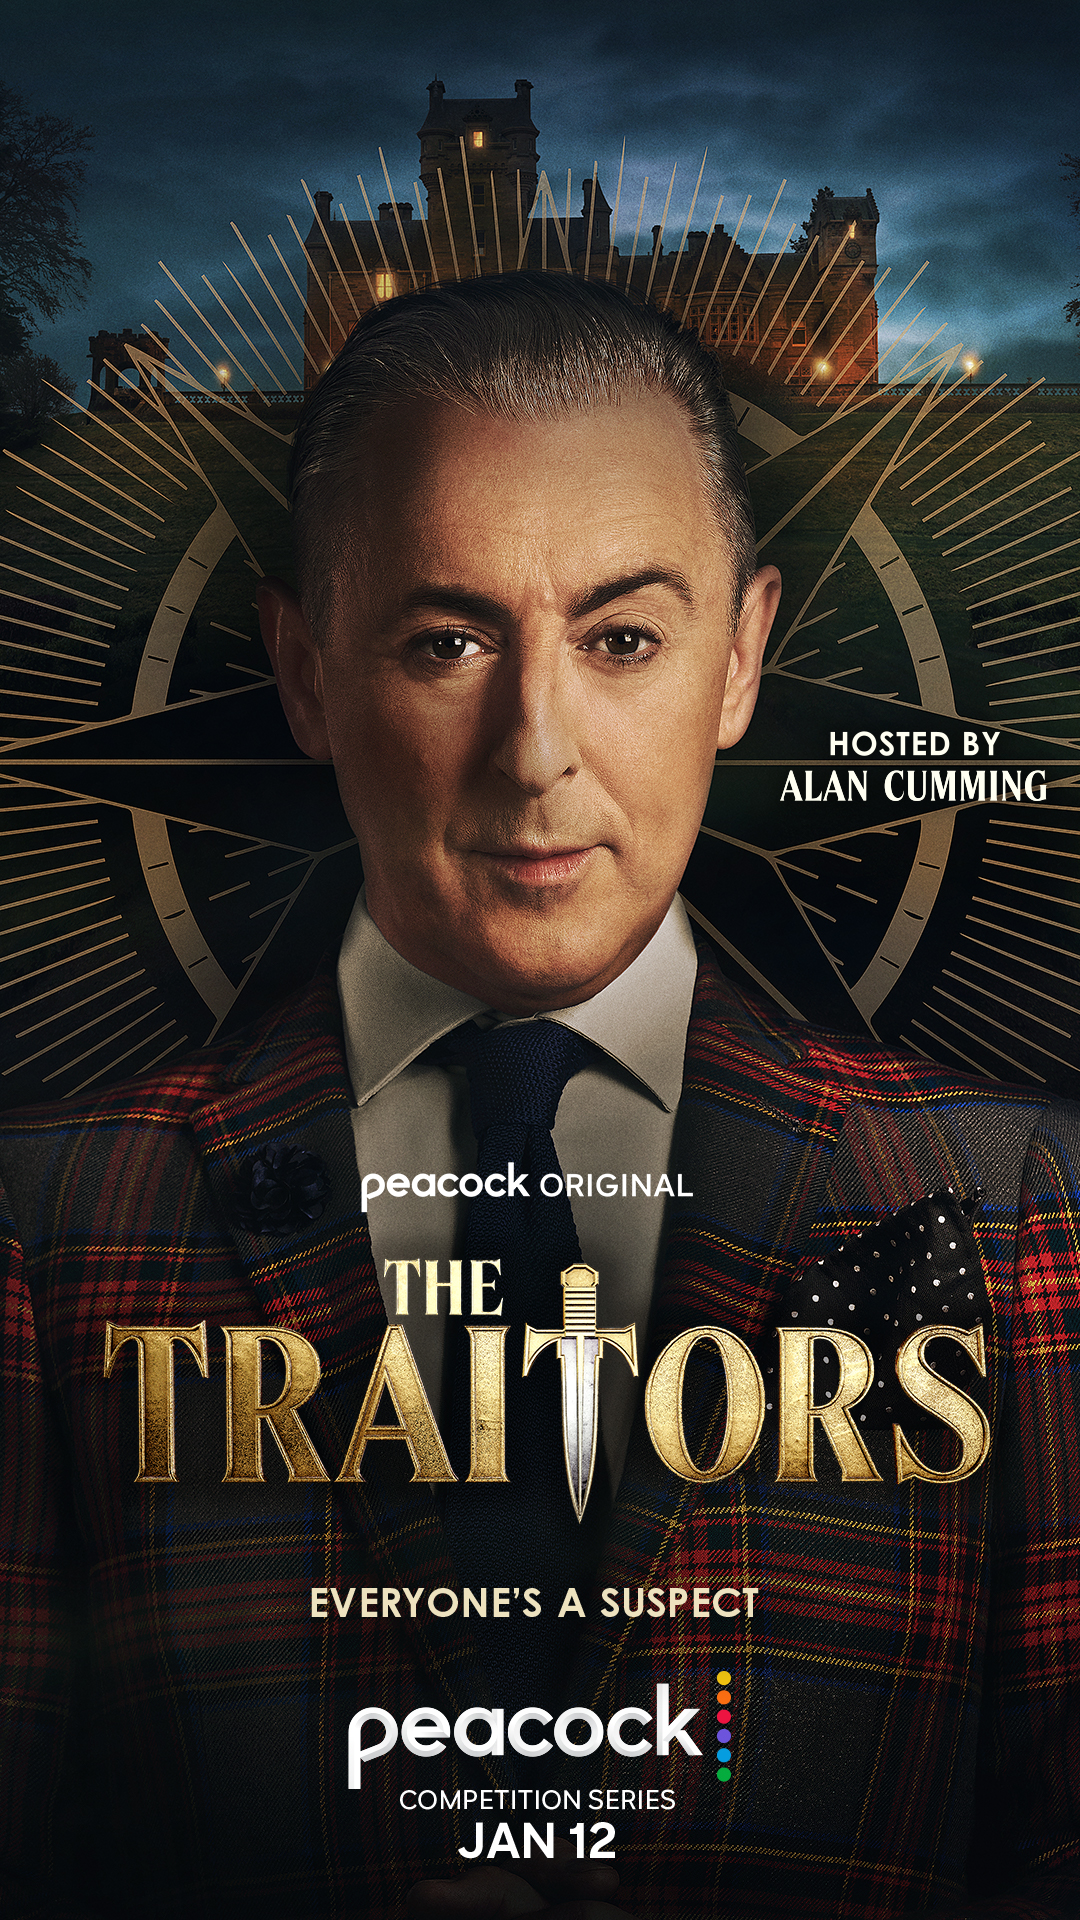 Alan Cumming for 'The Traitors'